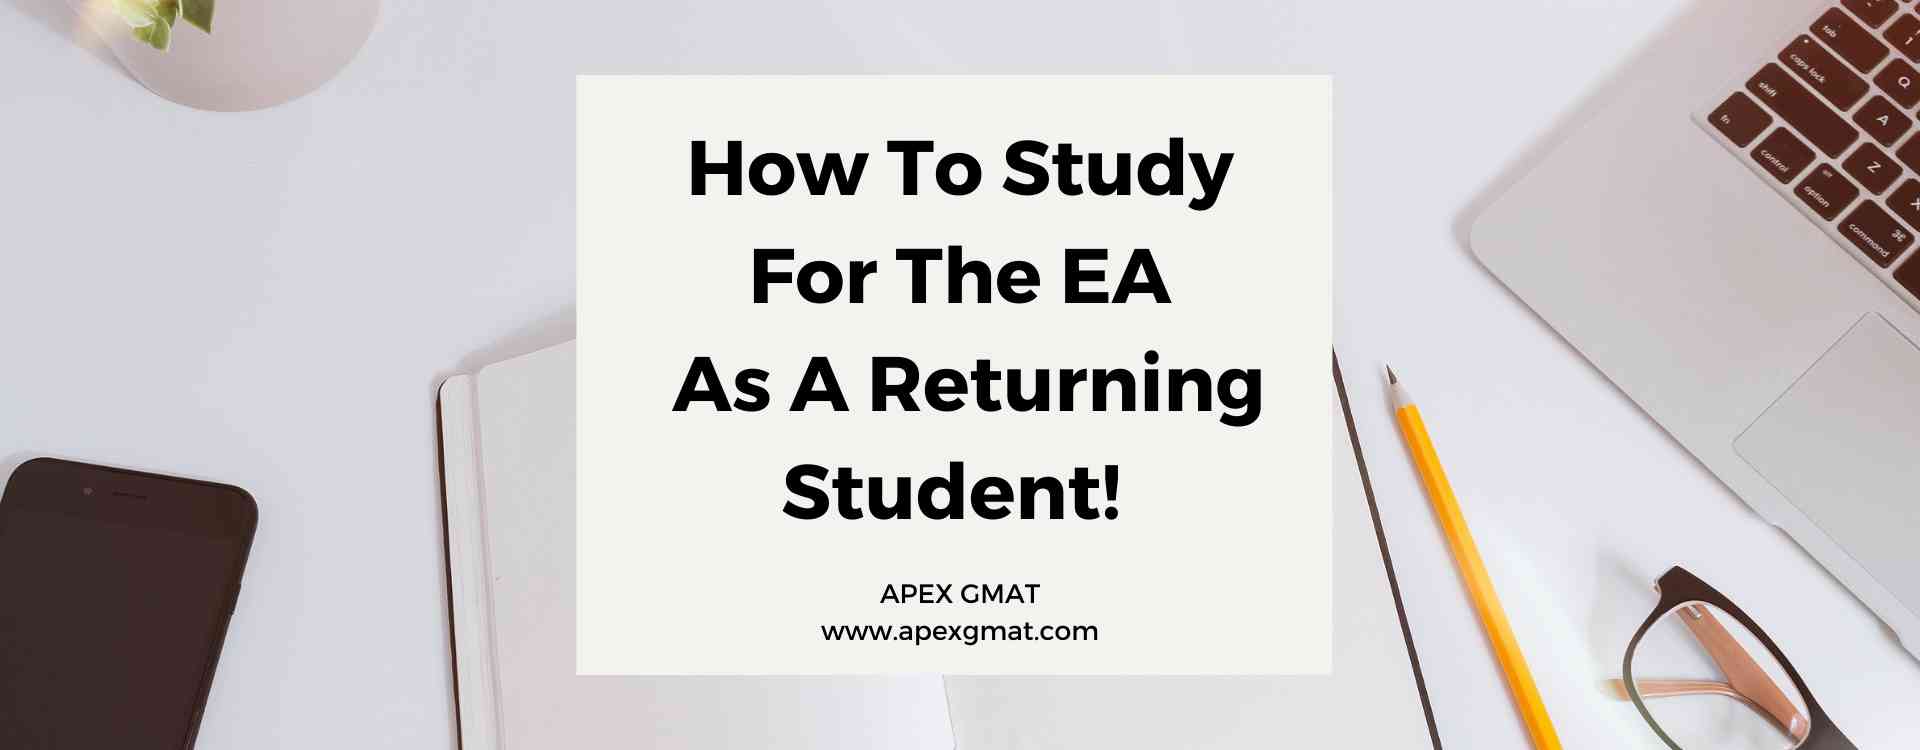 How To Study For The EA As A Returning Student!